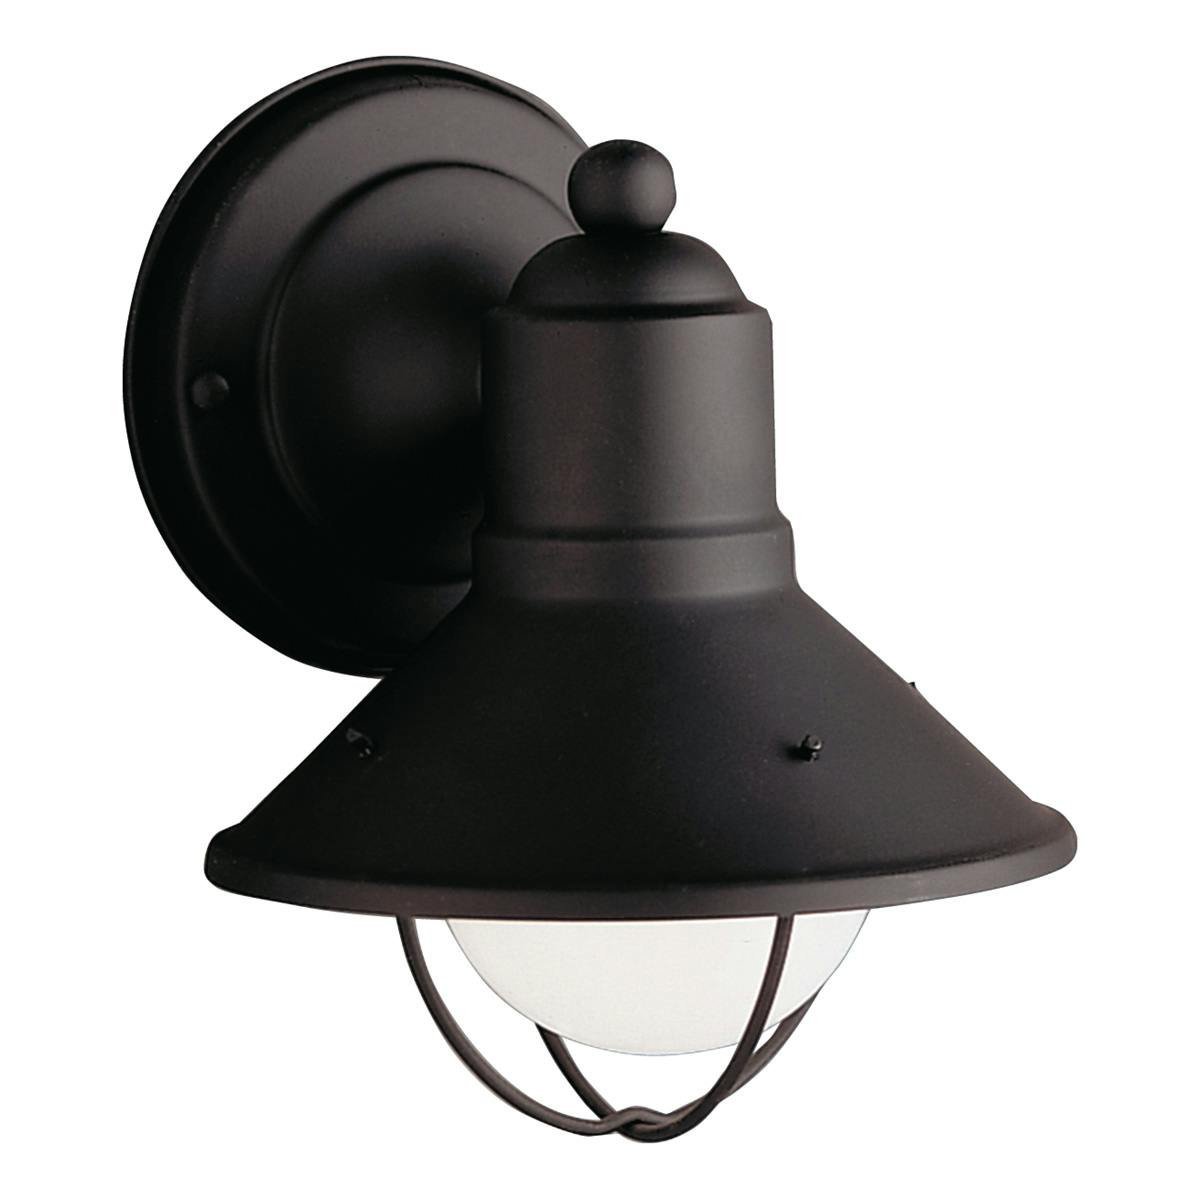 Product image for Seaside outdoor wall light 9021BK